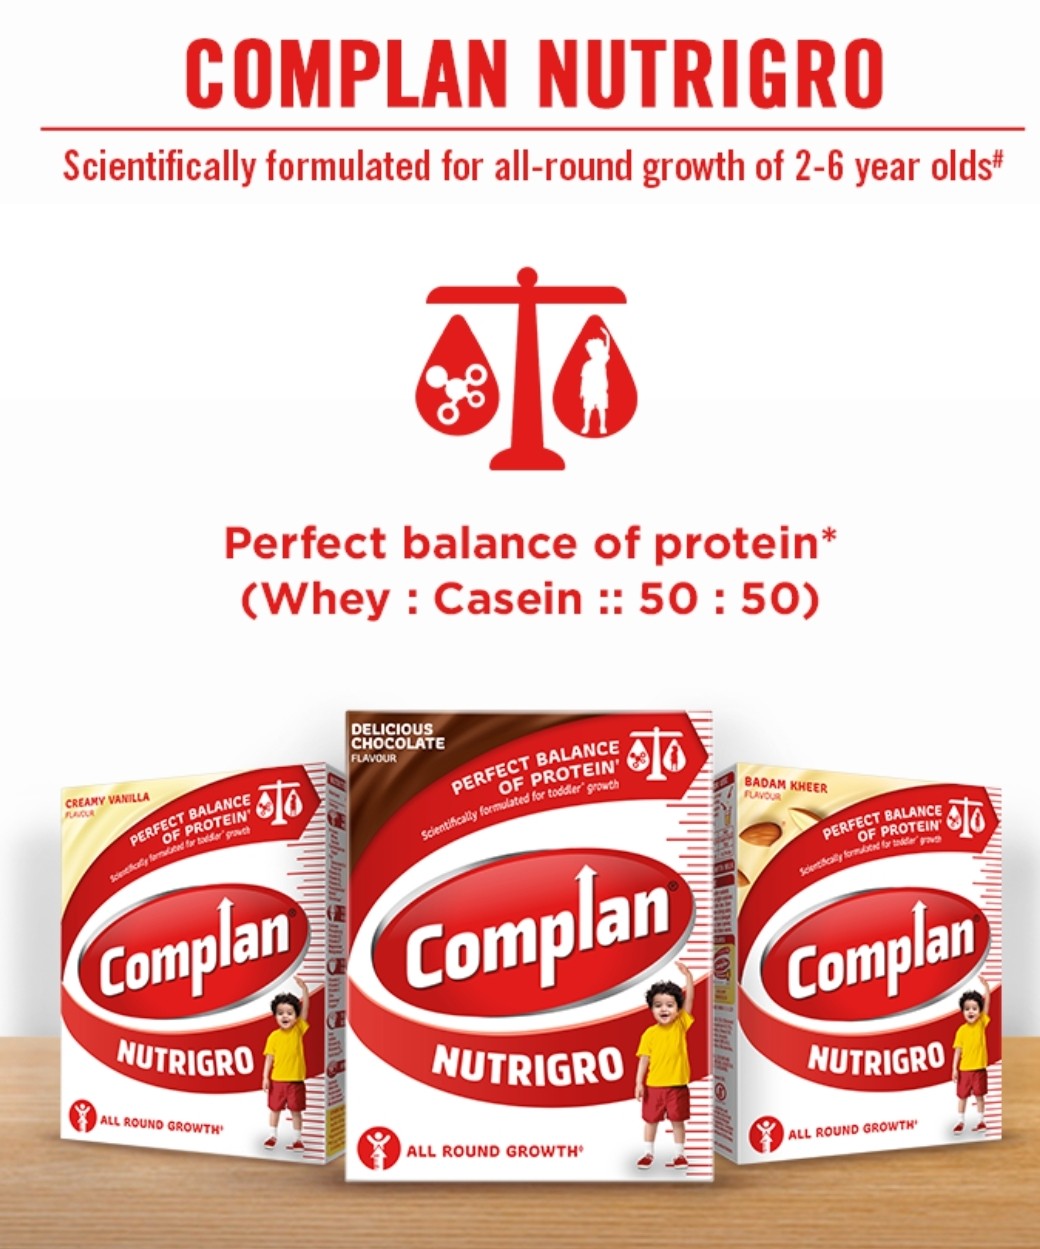 Complan with 26 minerals and vitamins is here for you 